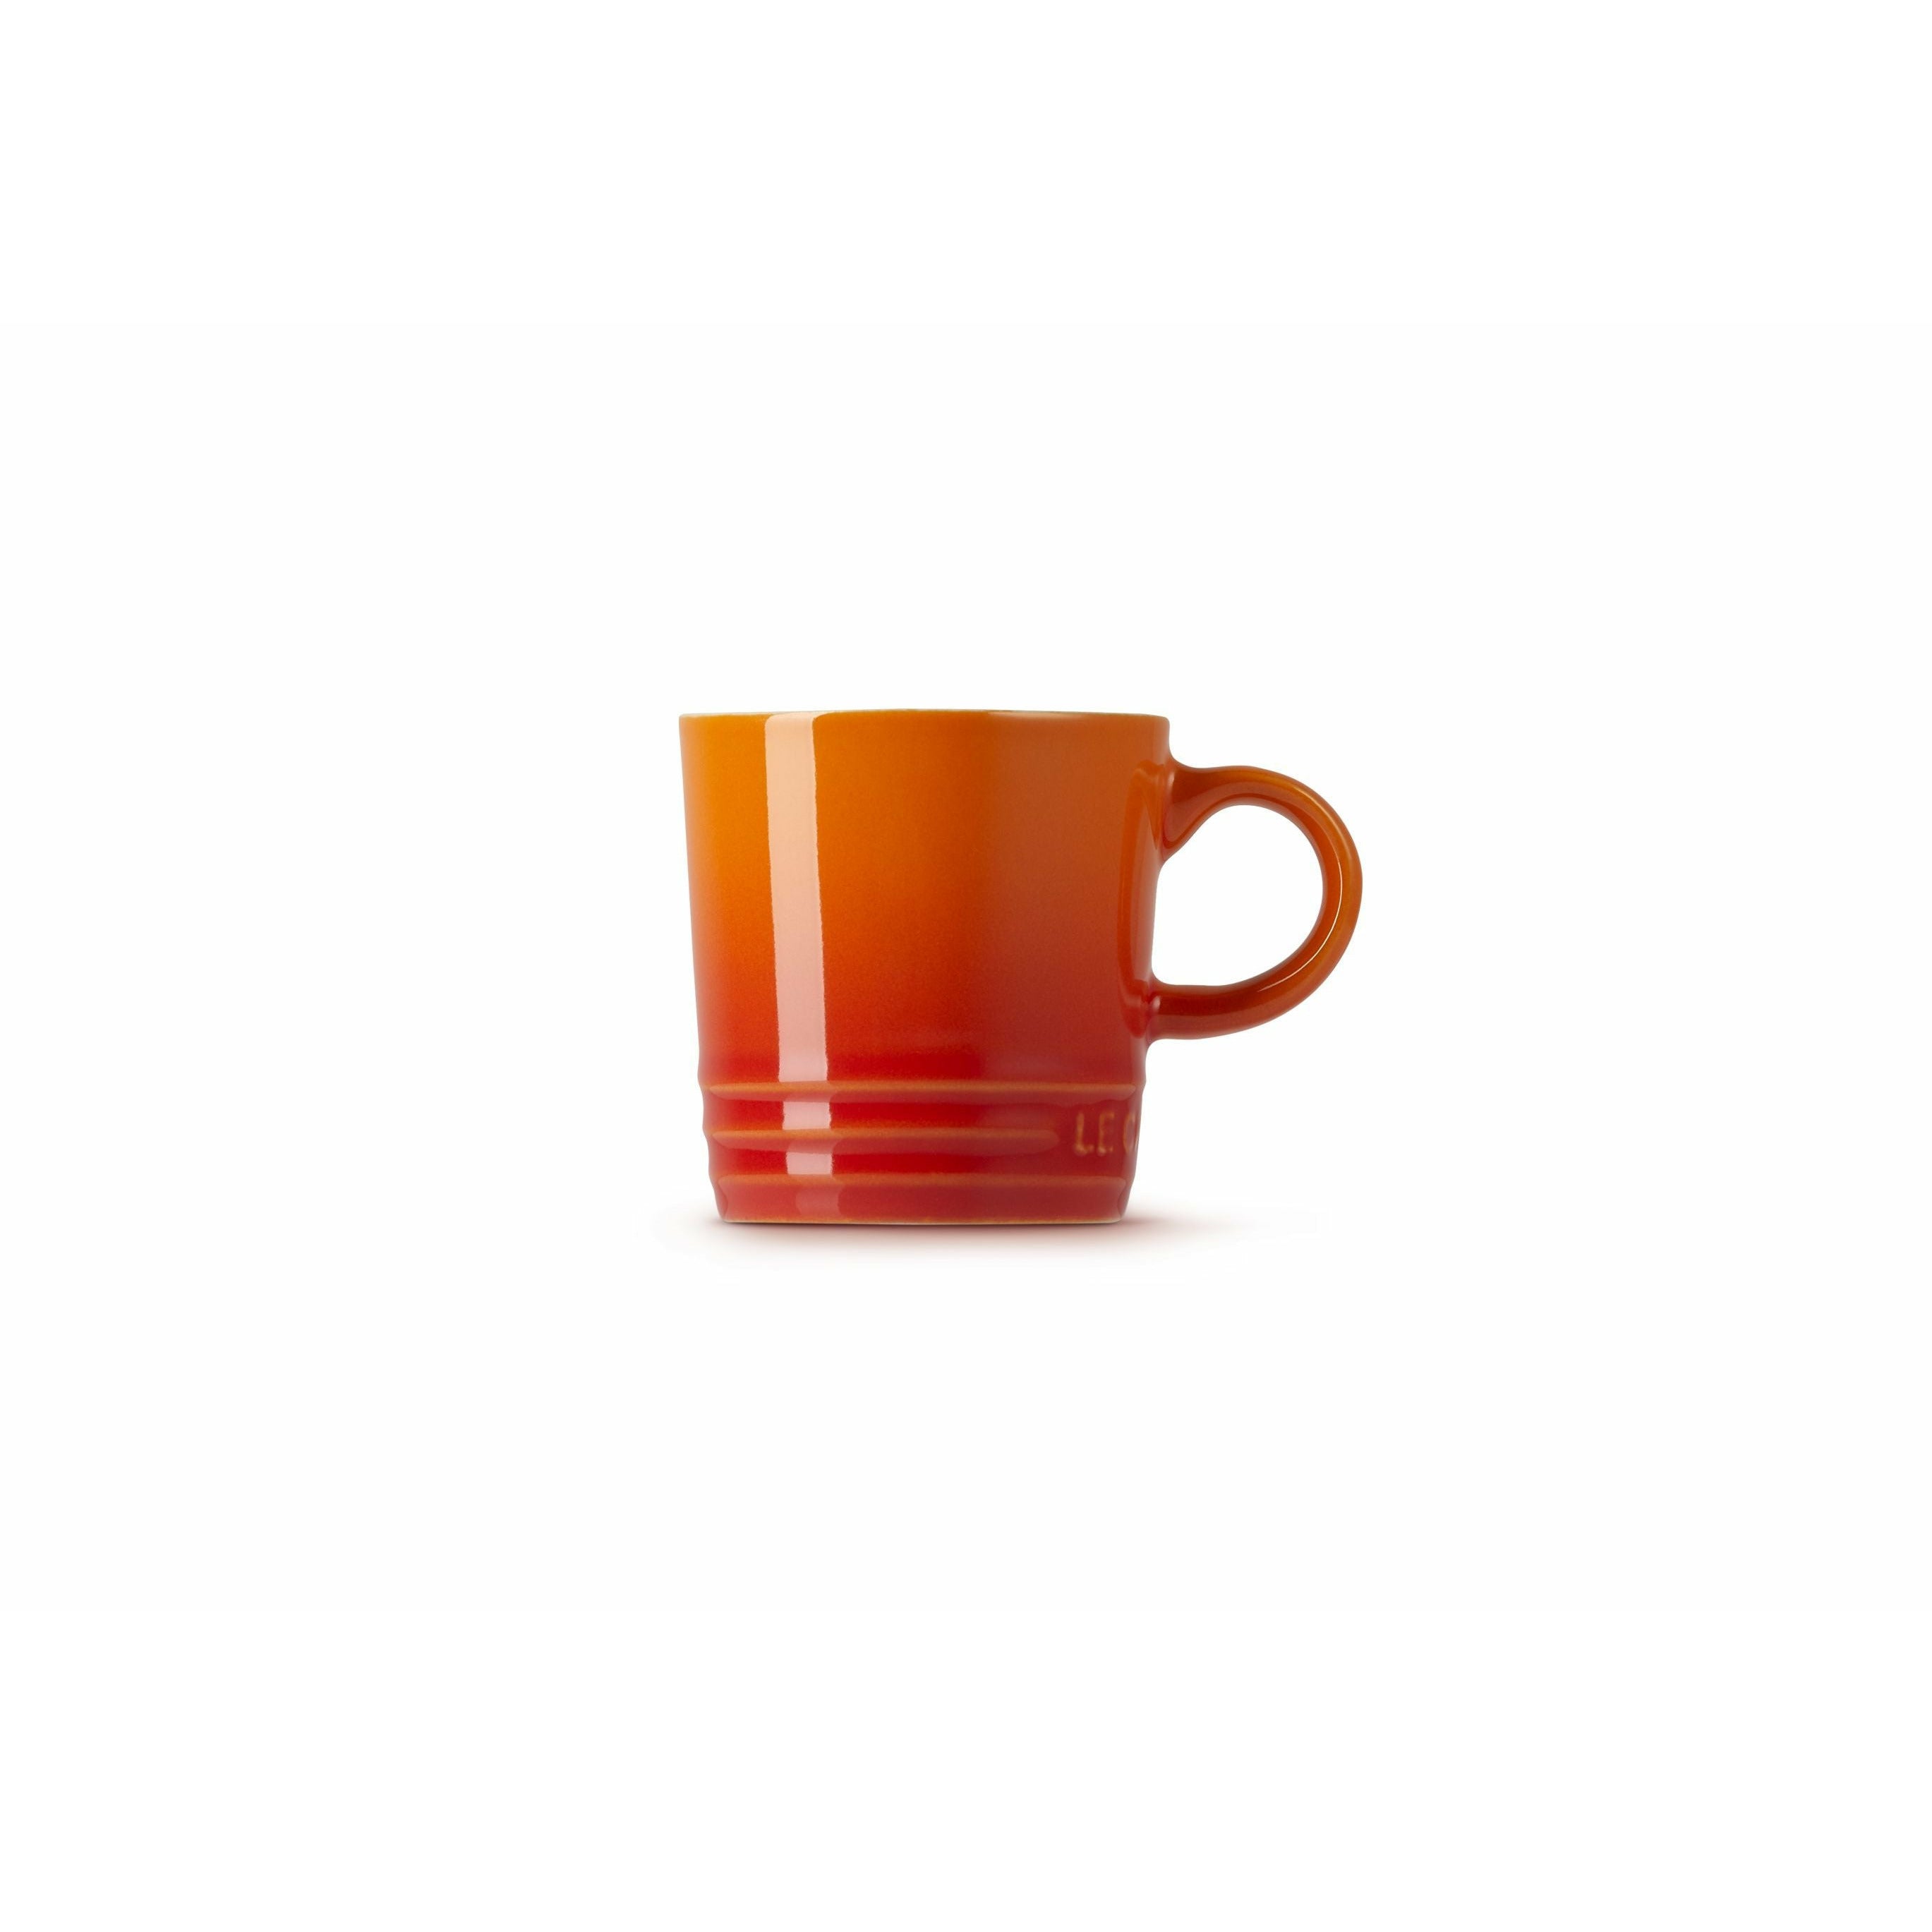 Le Creuset Espresso Cup 100 Ml, Oven Red